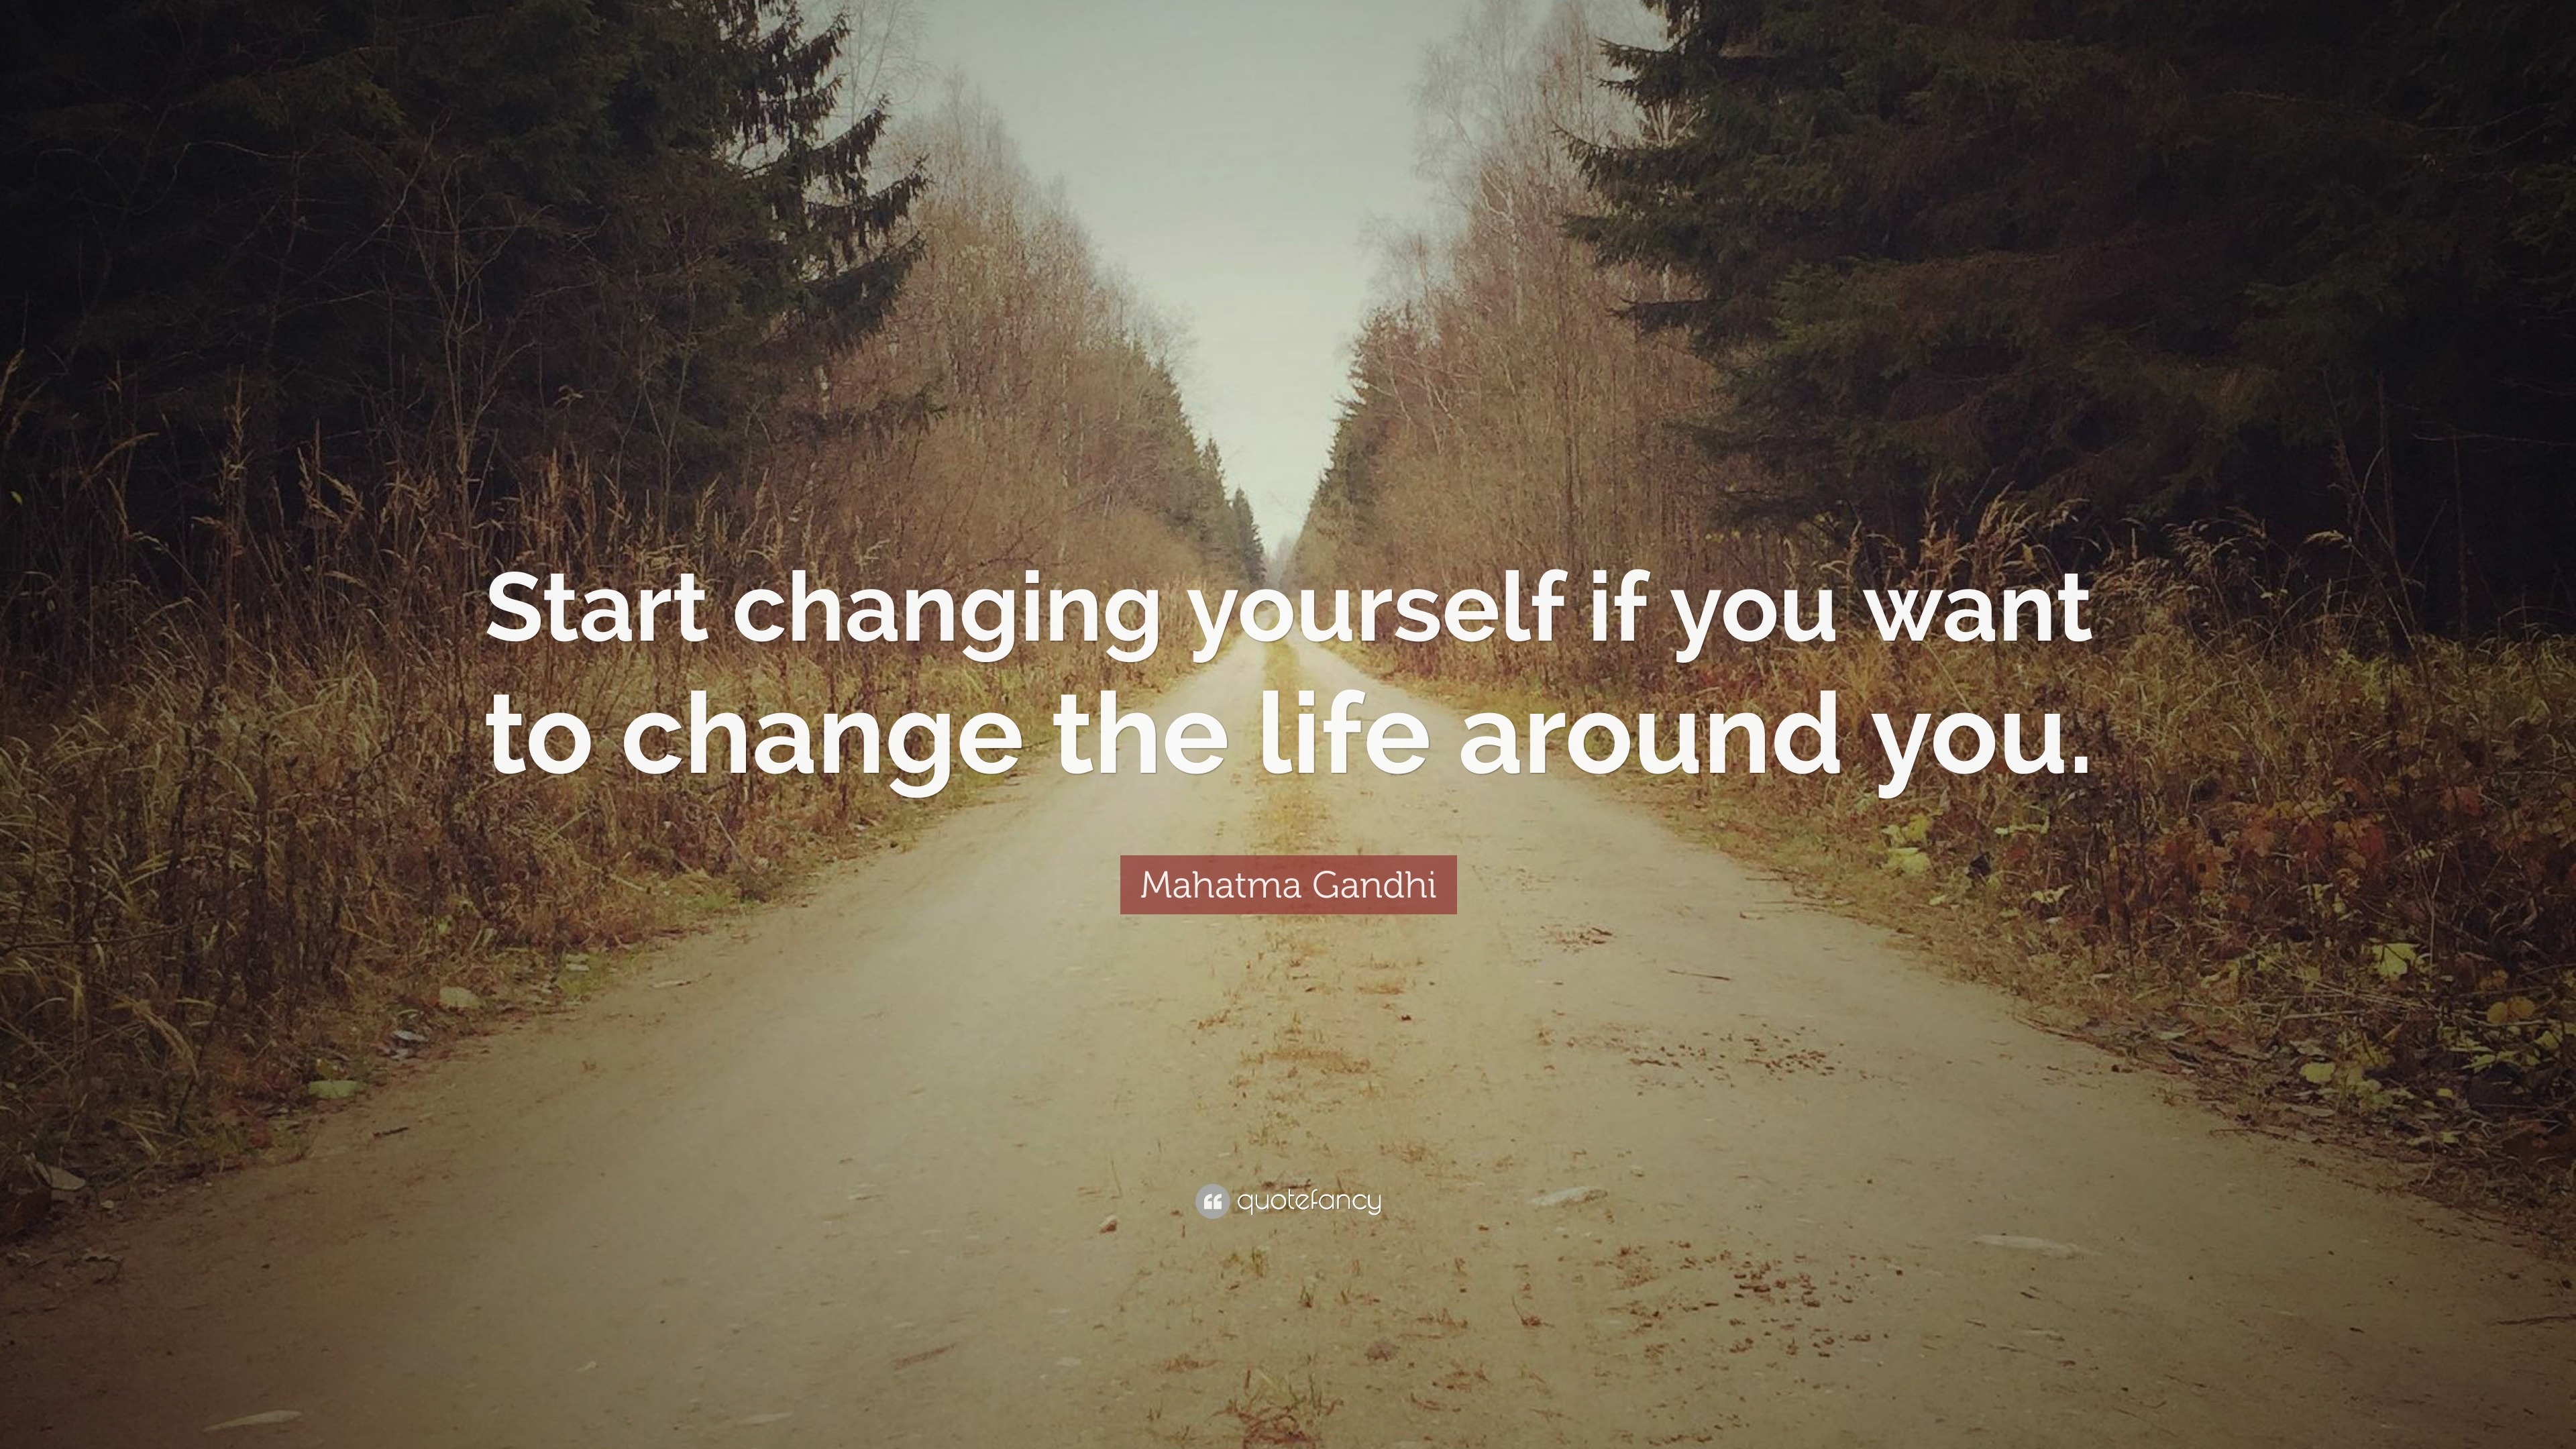 Mahatma Gandhi Quote: “Start changing yourself if you want to change